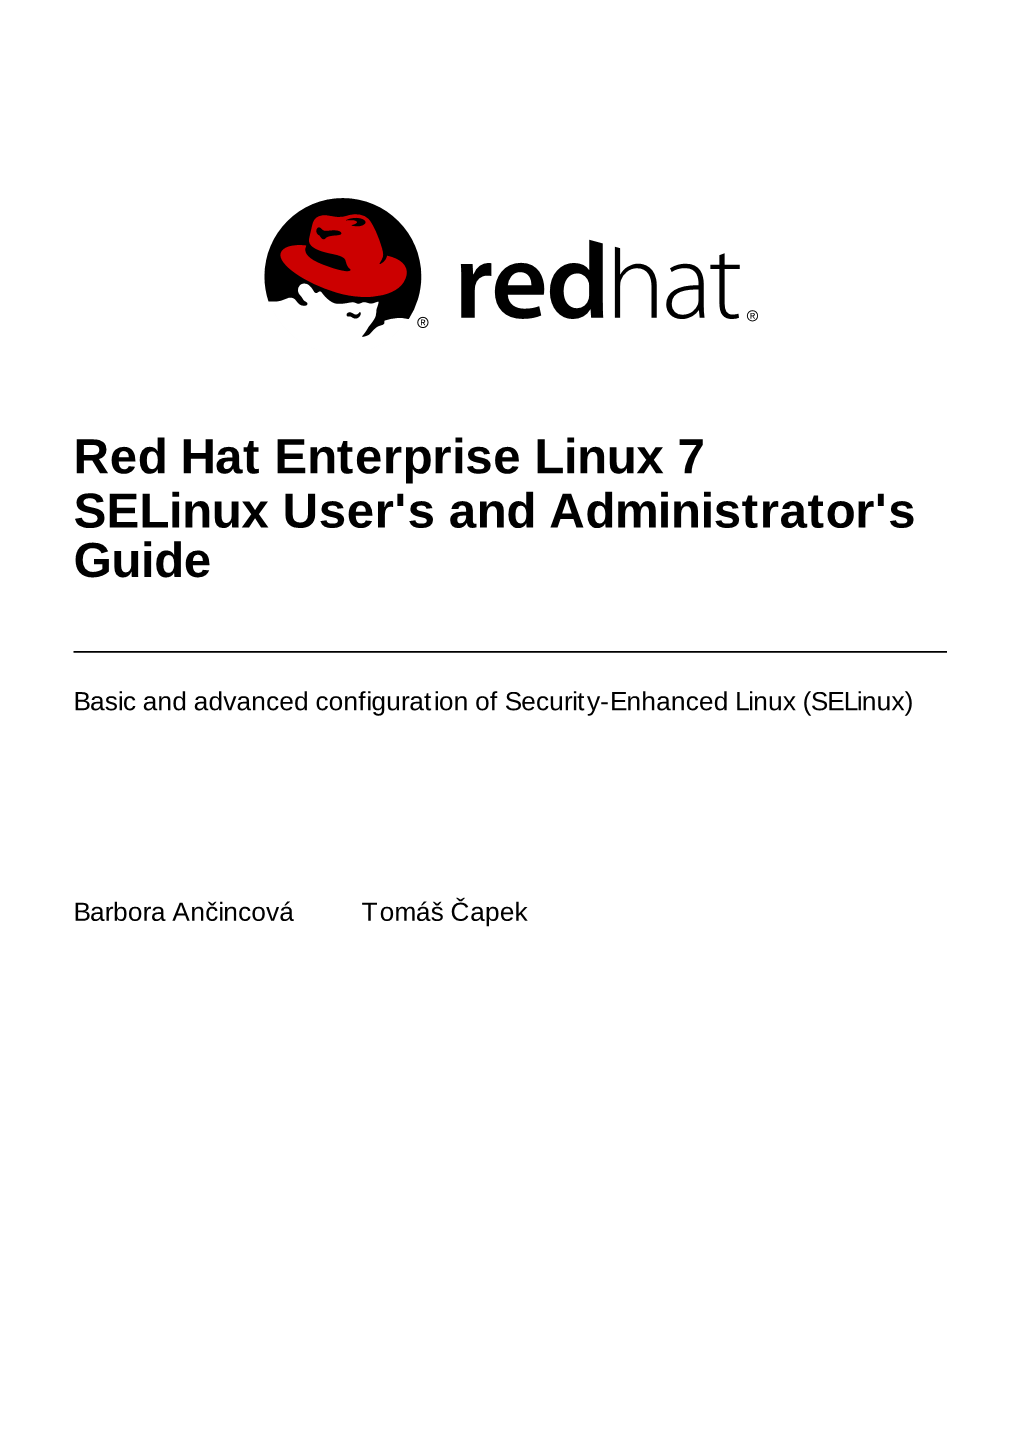 Red Hat Enterprise Linux 7 Selinux User's and Administrator's Guide